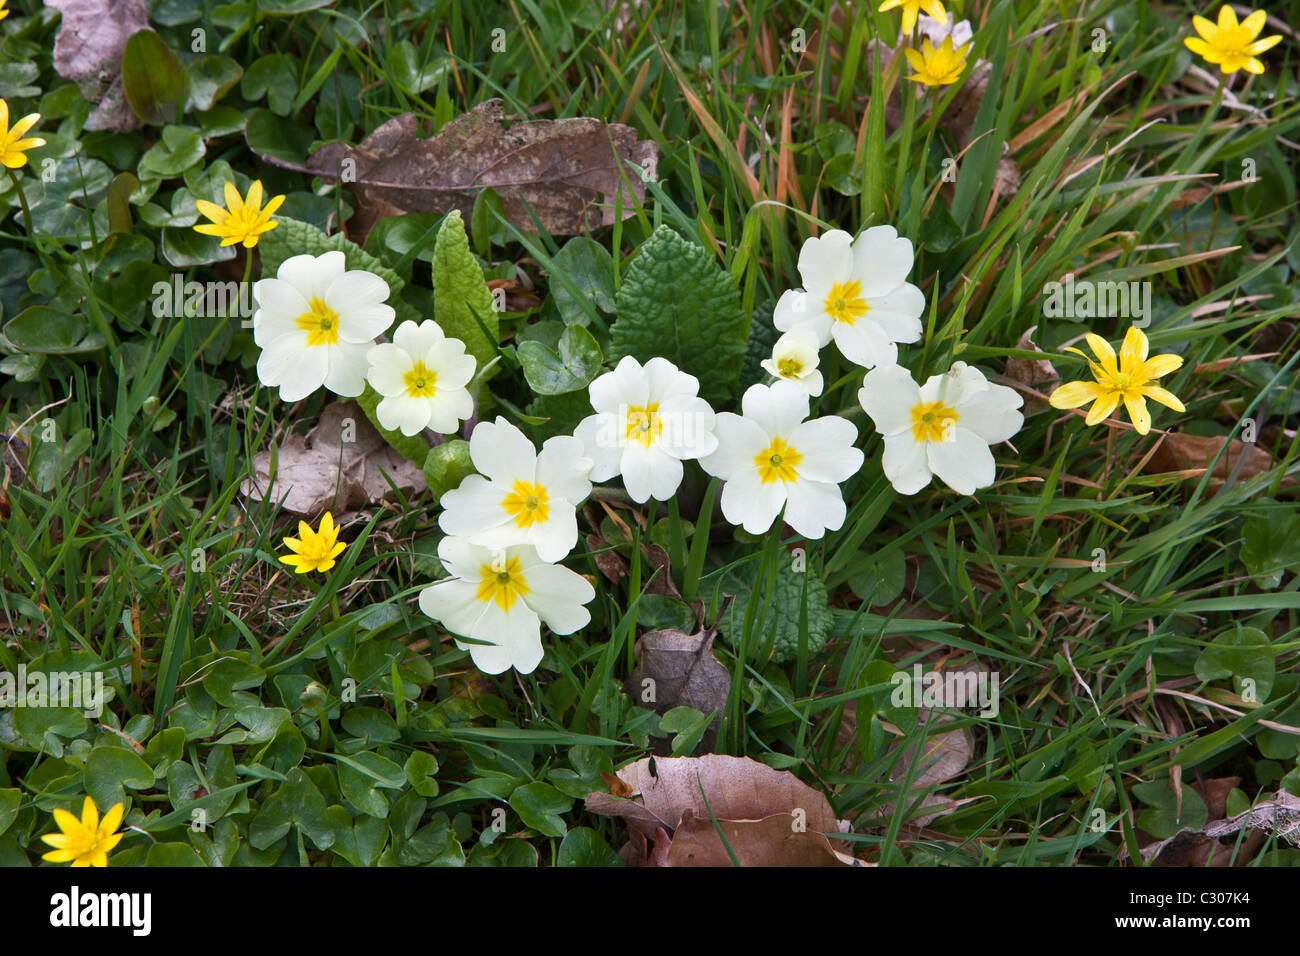 Spring and summer hedgerow wildflower Primrose, Primula vulgaris, Lesser Celandine, and grass in Cornwall, England, UK Stock Photo